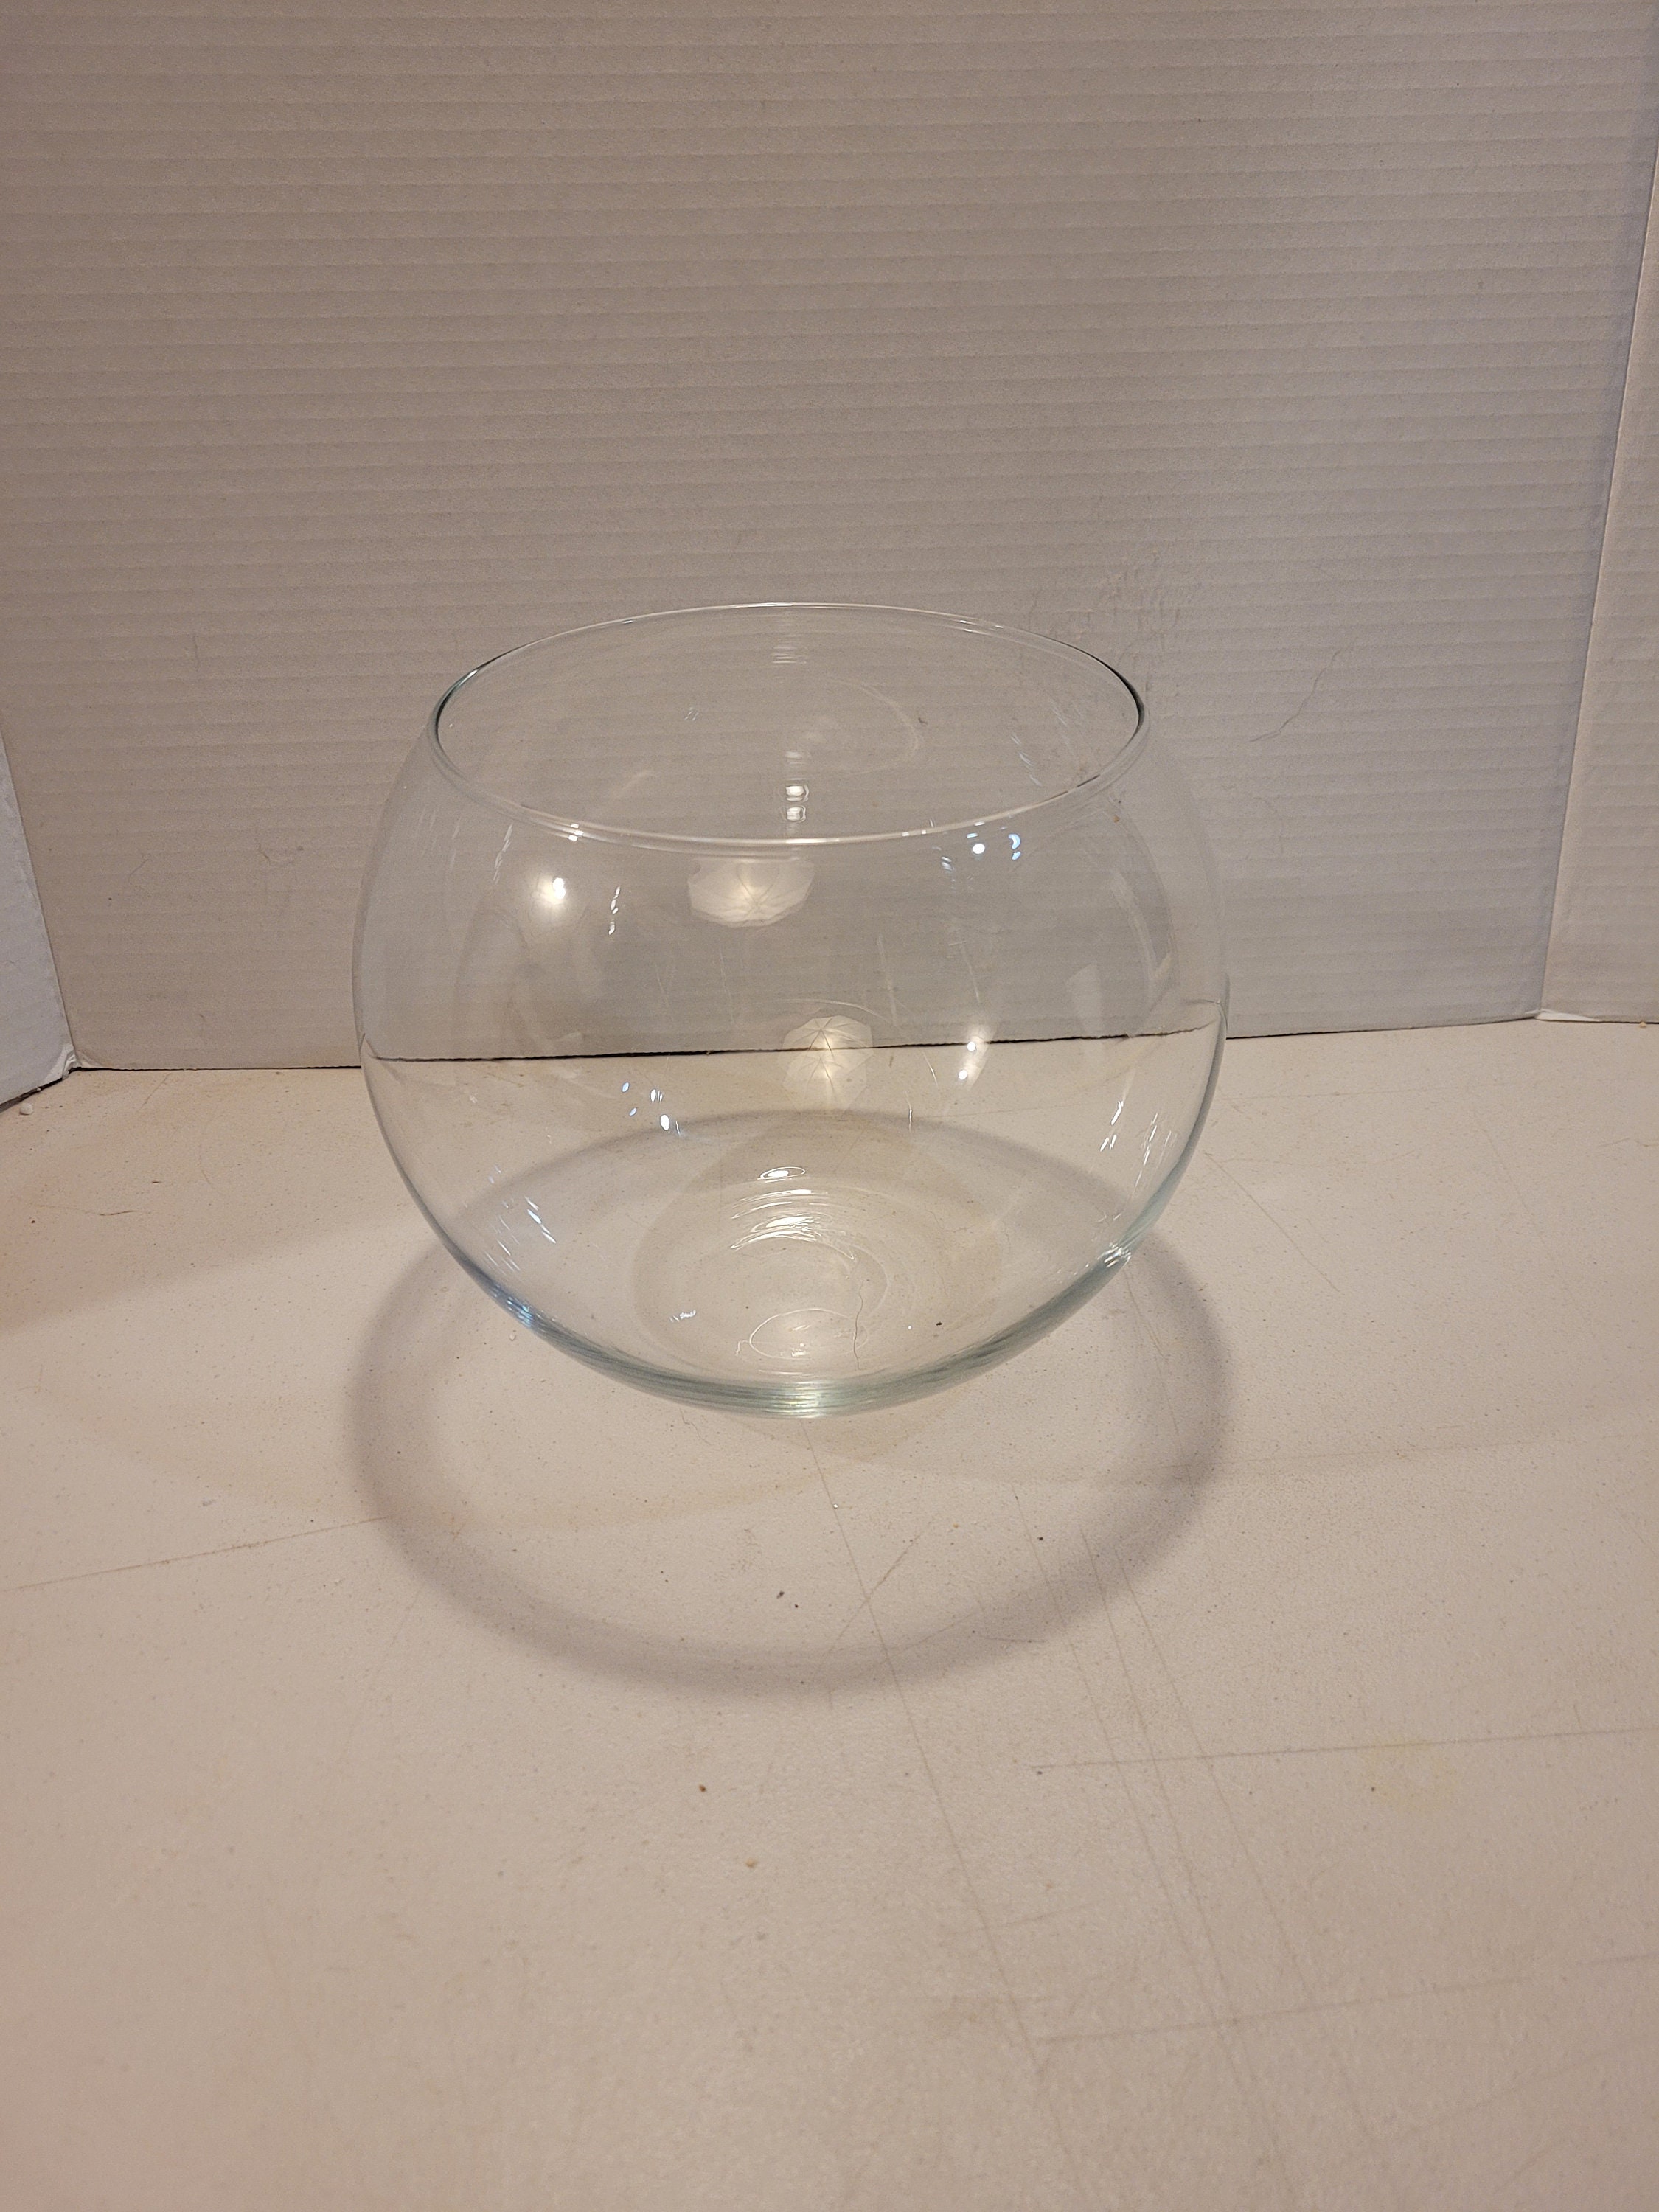 3L Oversized Giant Beer Glass - Fish bowl Inspired